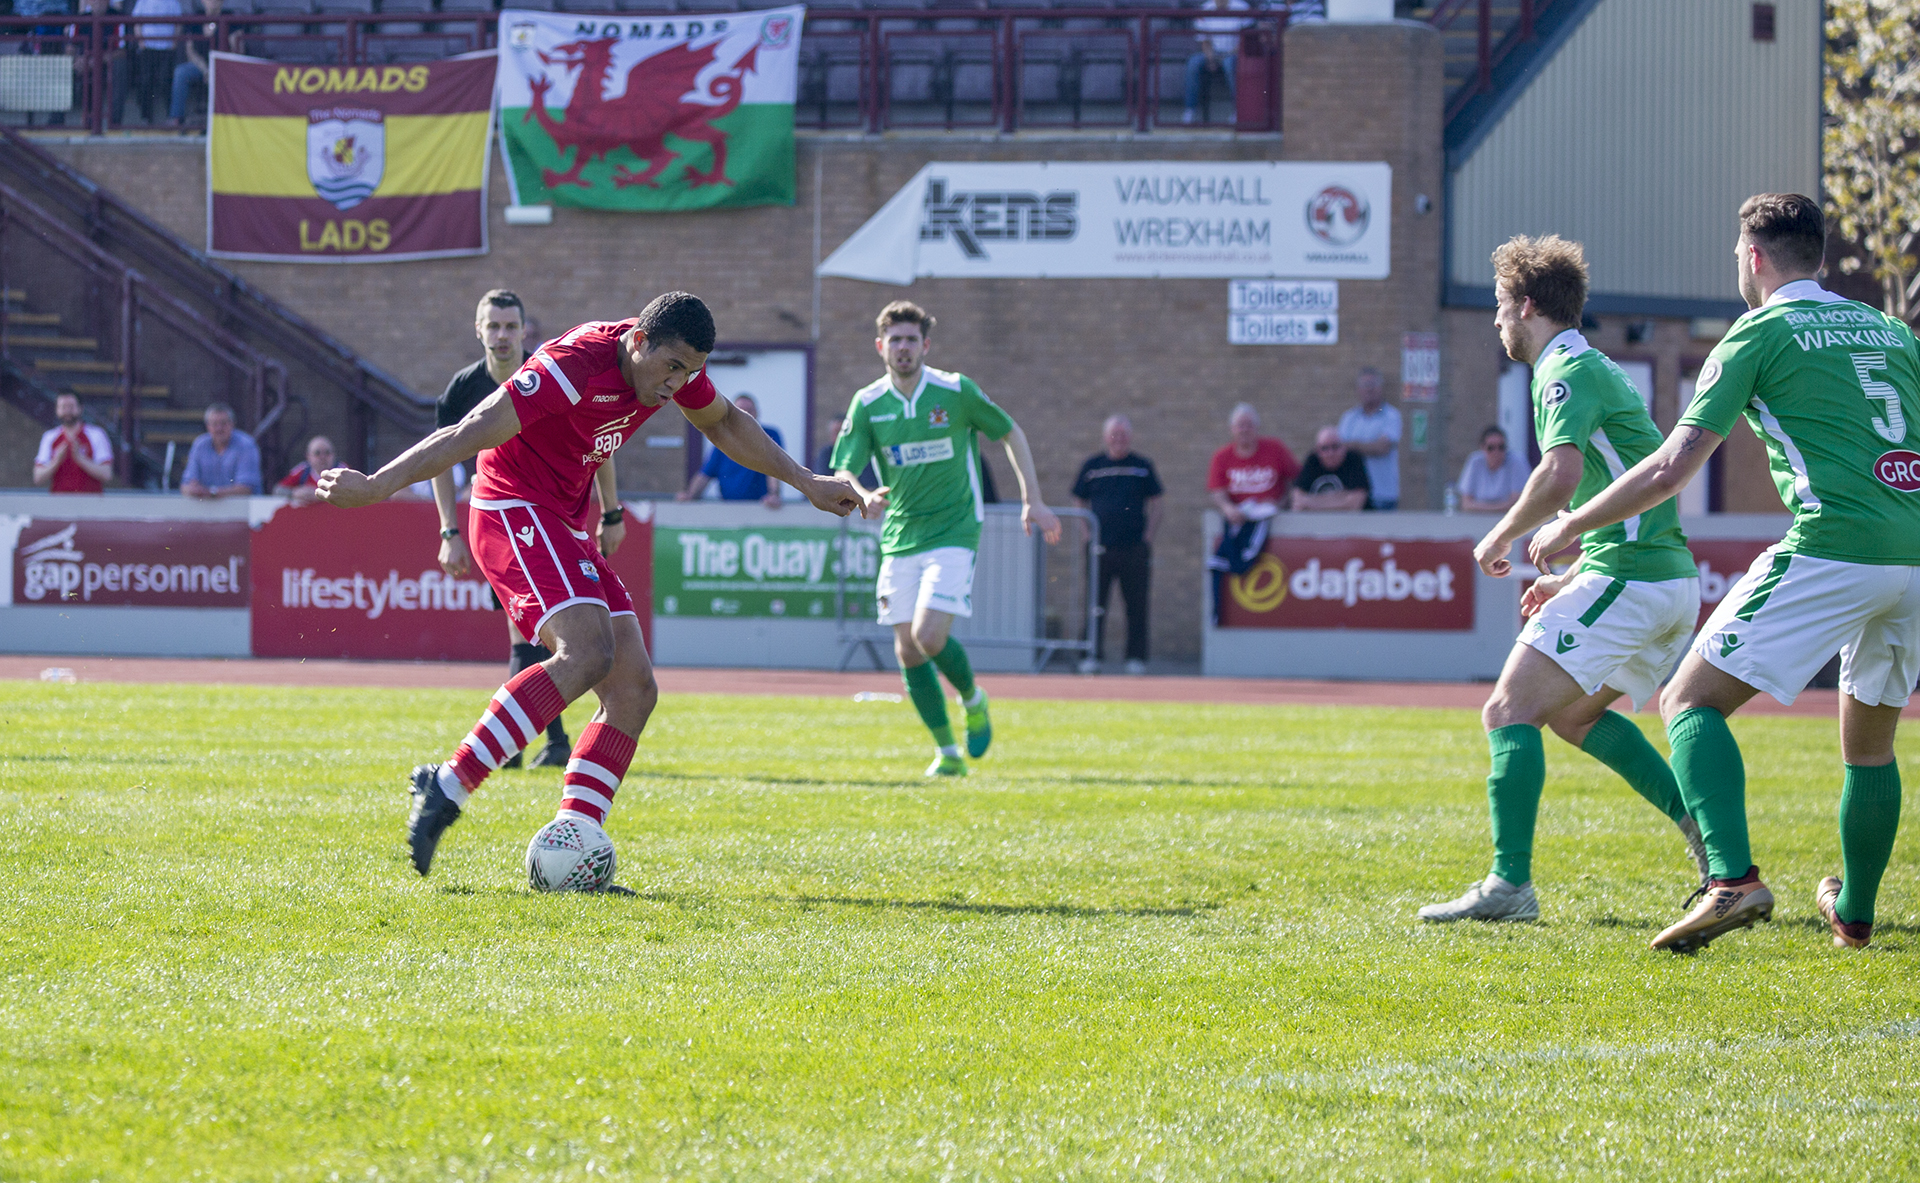 Priestley Farquharson misses an opportunity to double The Nomads' lead before Barry equalised | © NCM Media